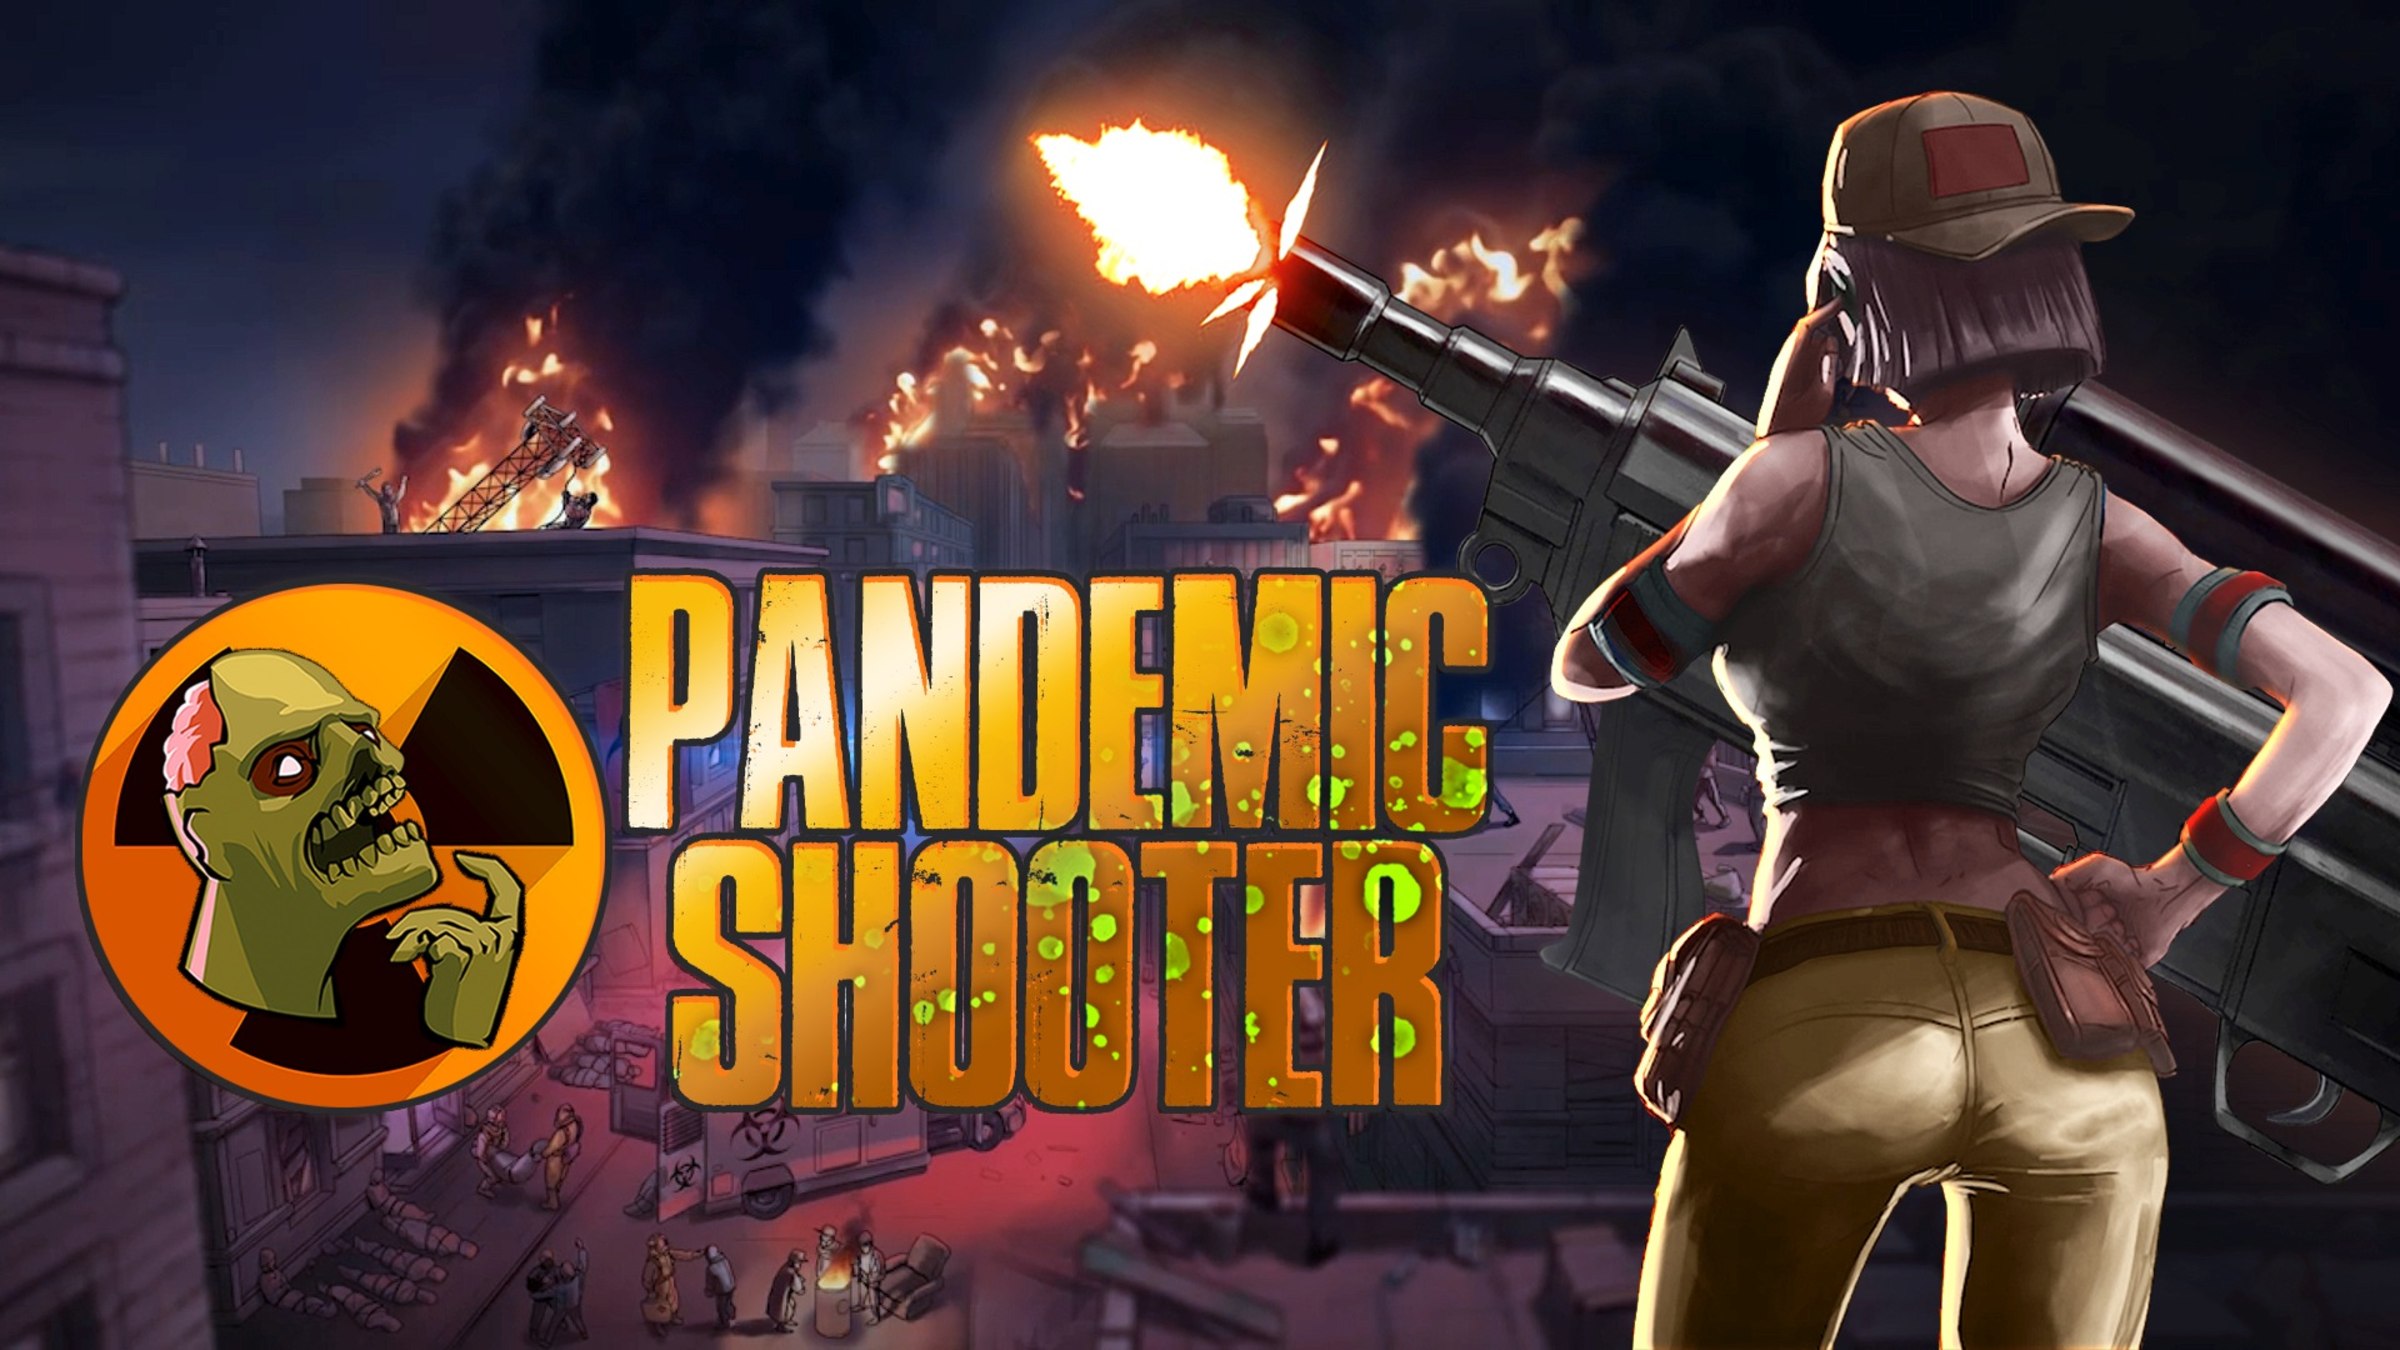 Pandemic Shooter for Nintendo Switch